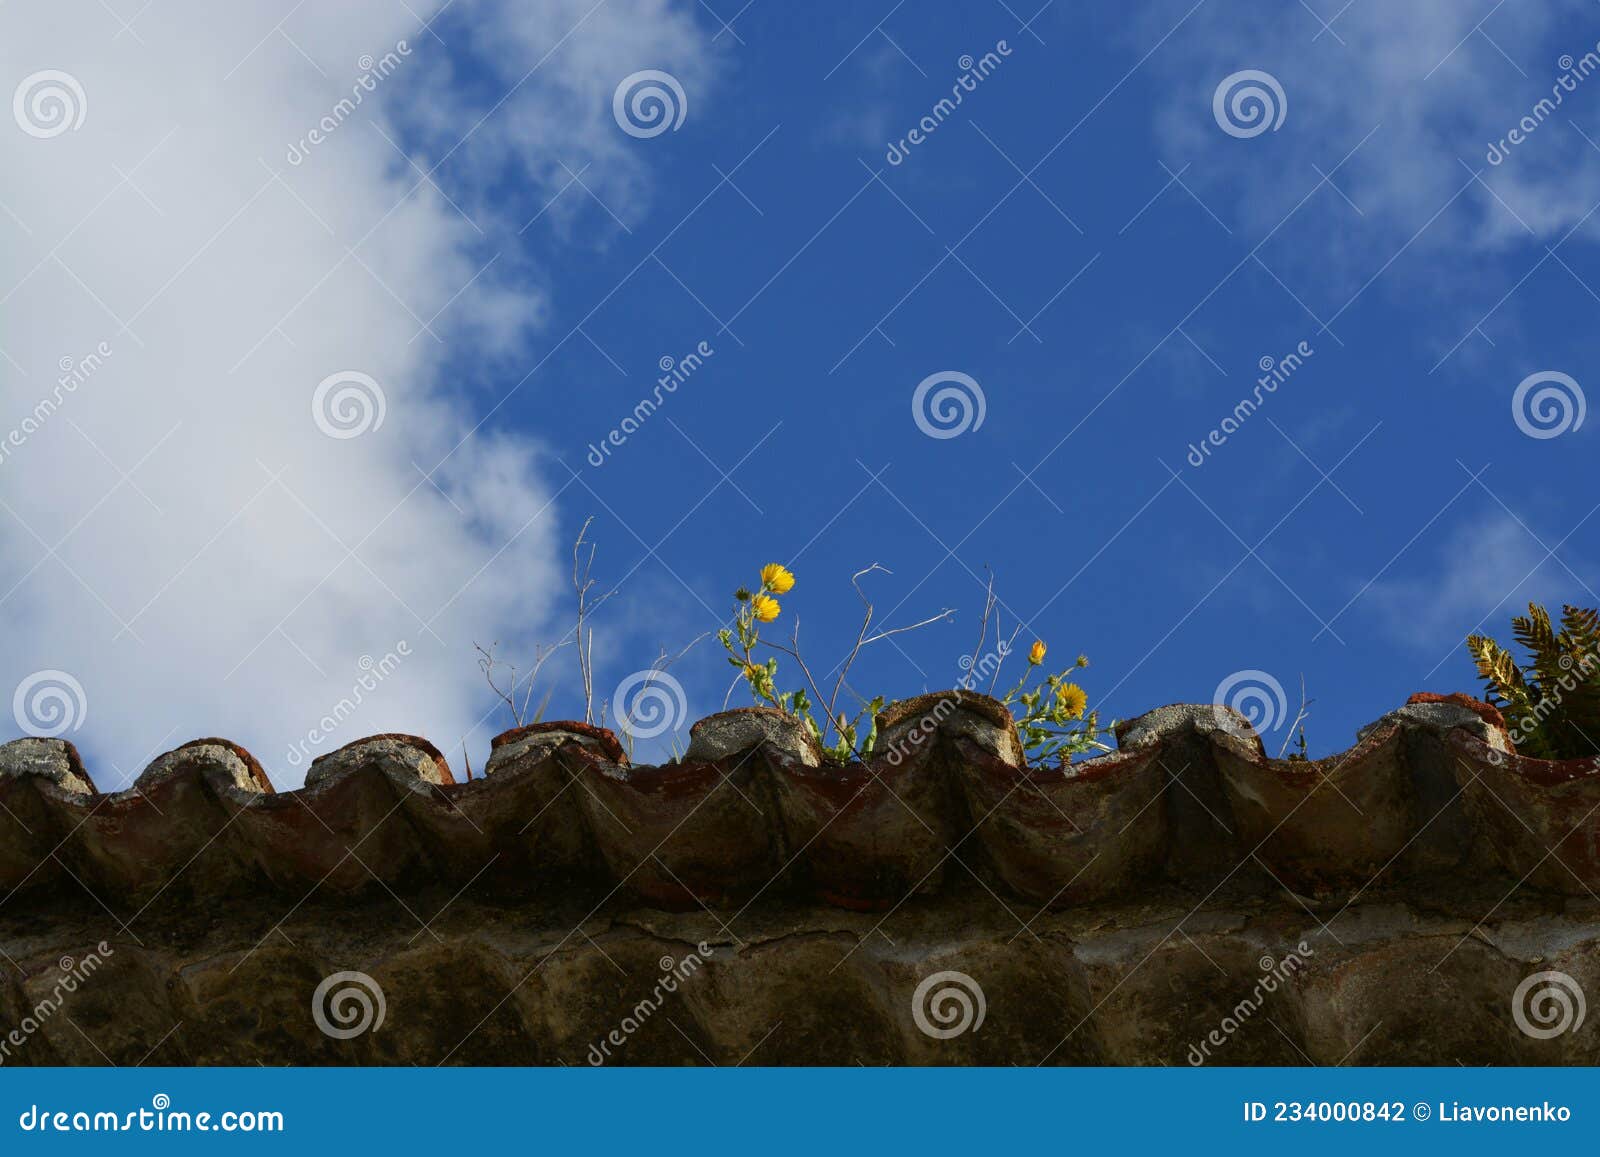 old roof on the sky background. flowers on the sky background.